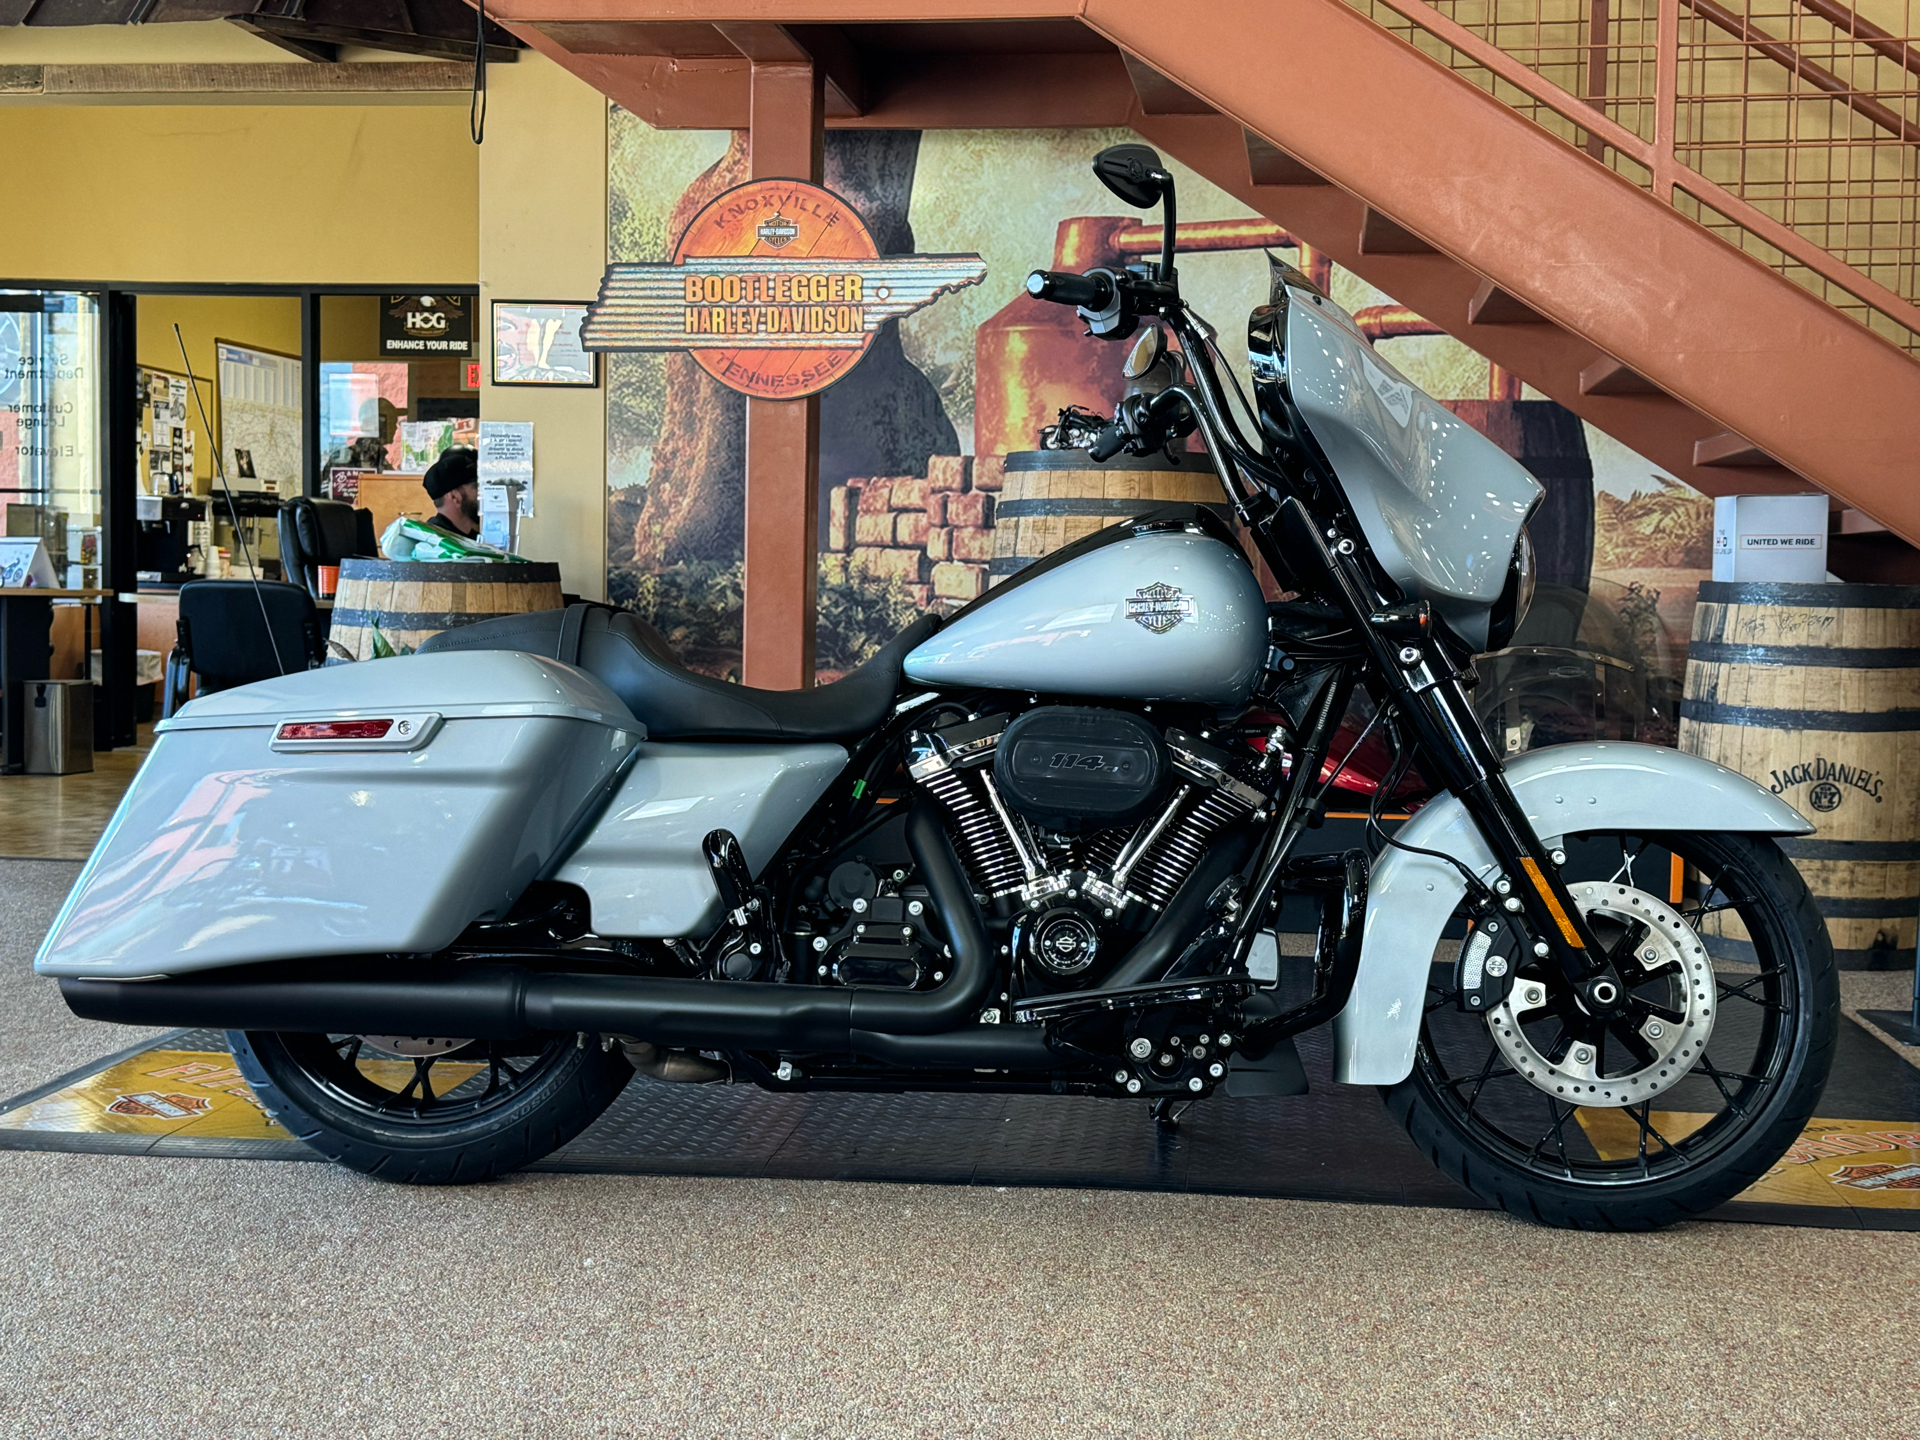 2023 Harley-Davidson Street Glide® Special in Knoxville, Tennessee - Photo 1